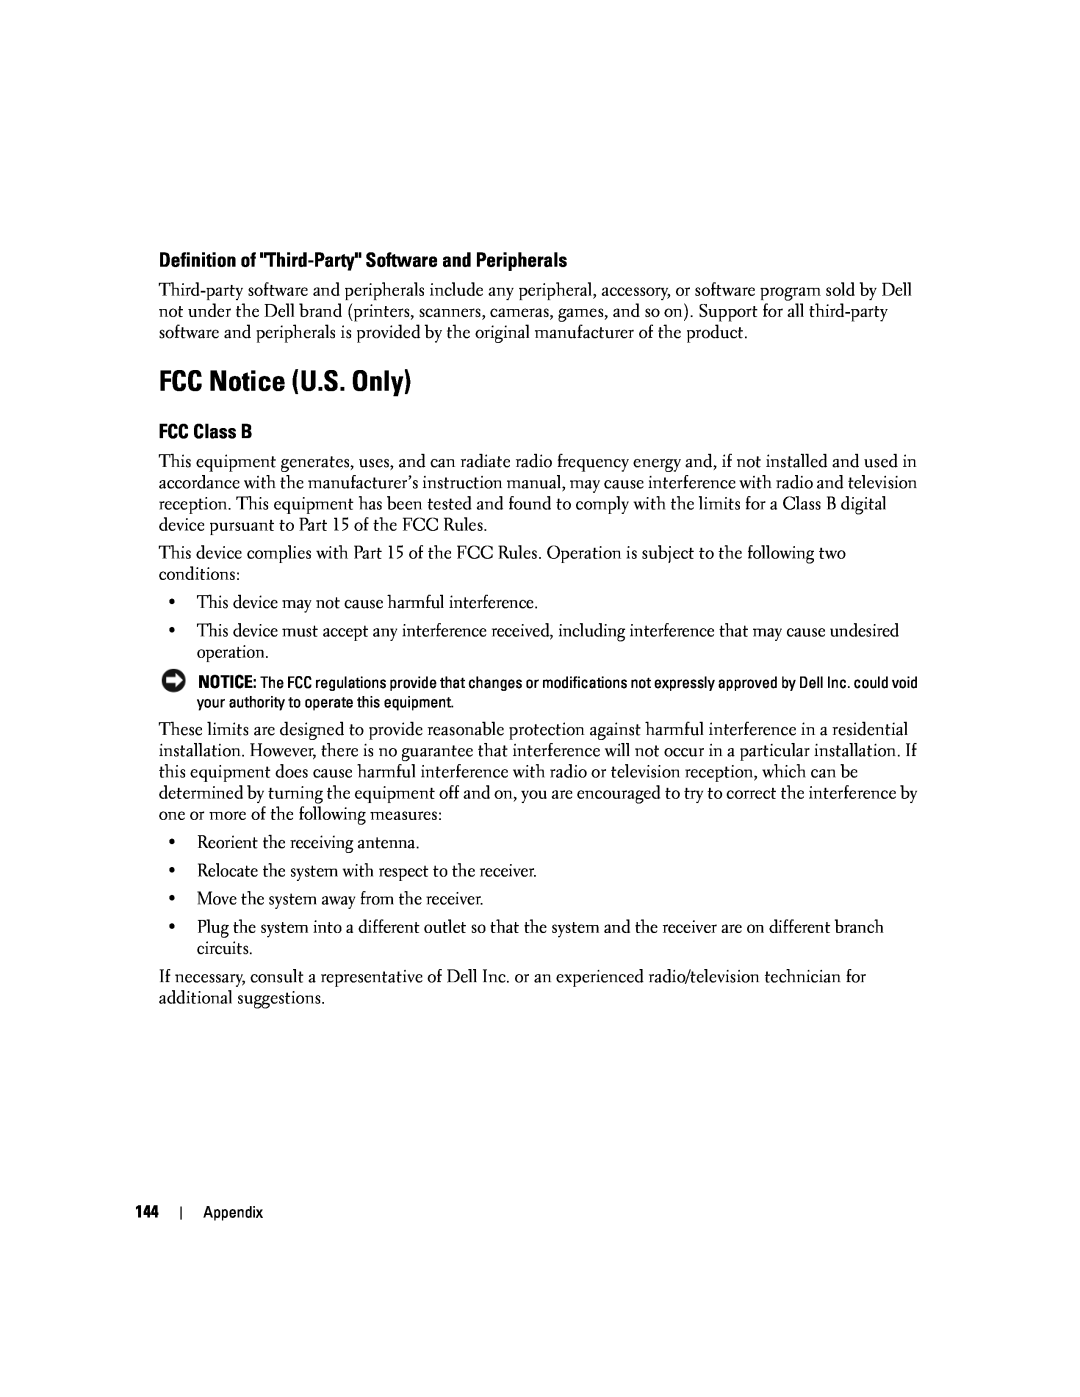 Dell 1501 owner manual FCC Notice U.S. Only, Definition of Third-Party Software and Peripherals, FCC Class B 